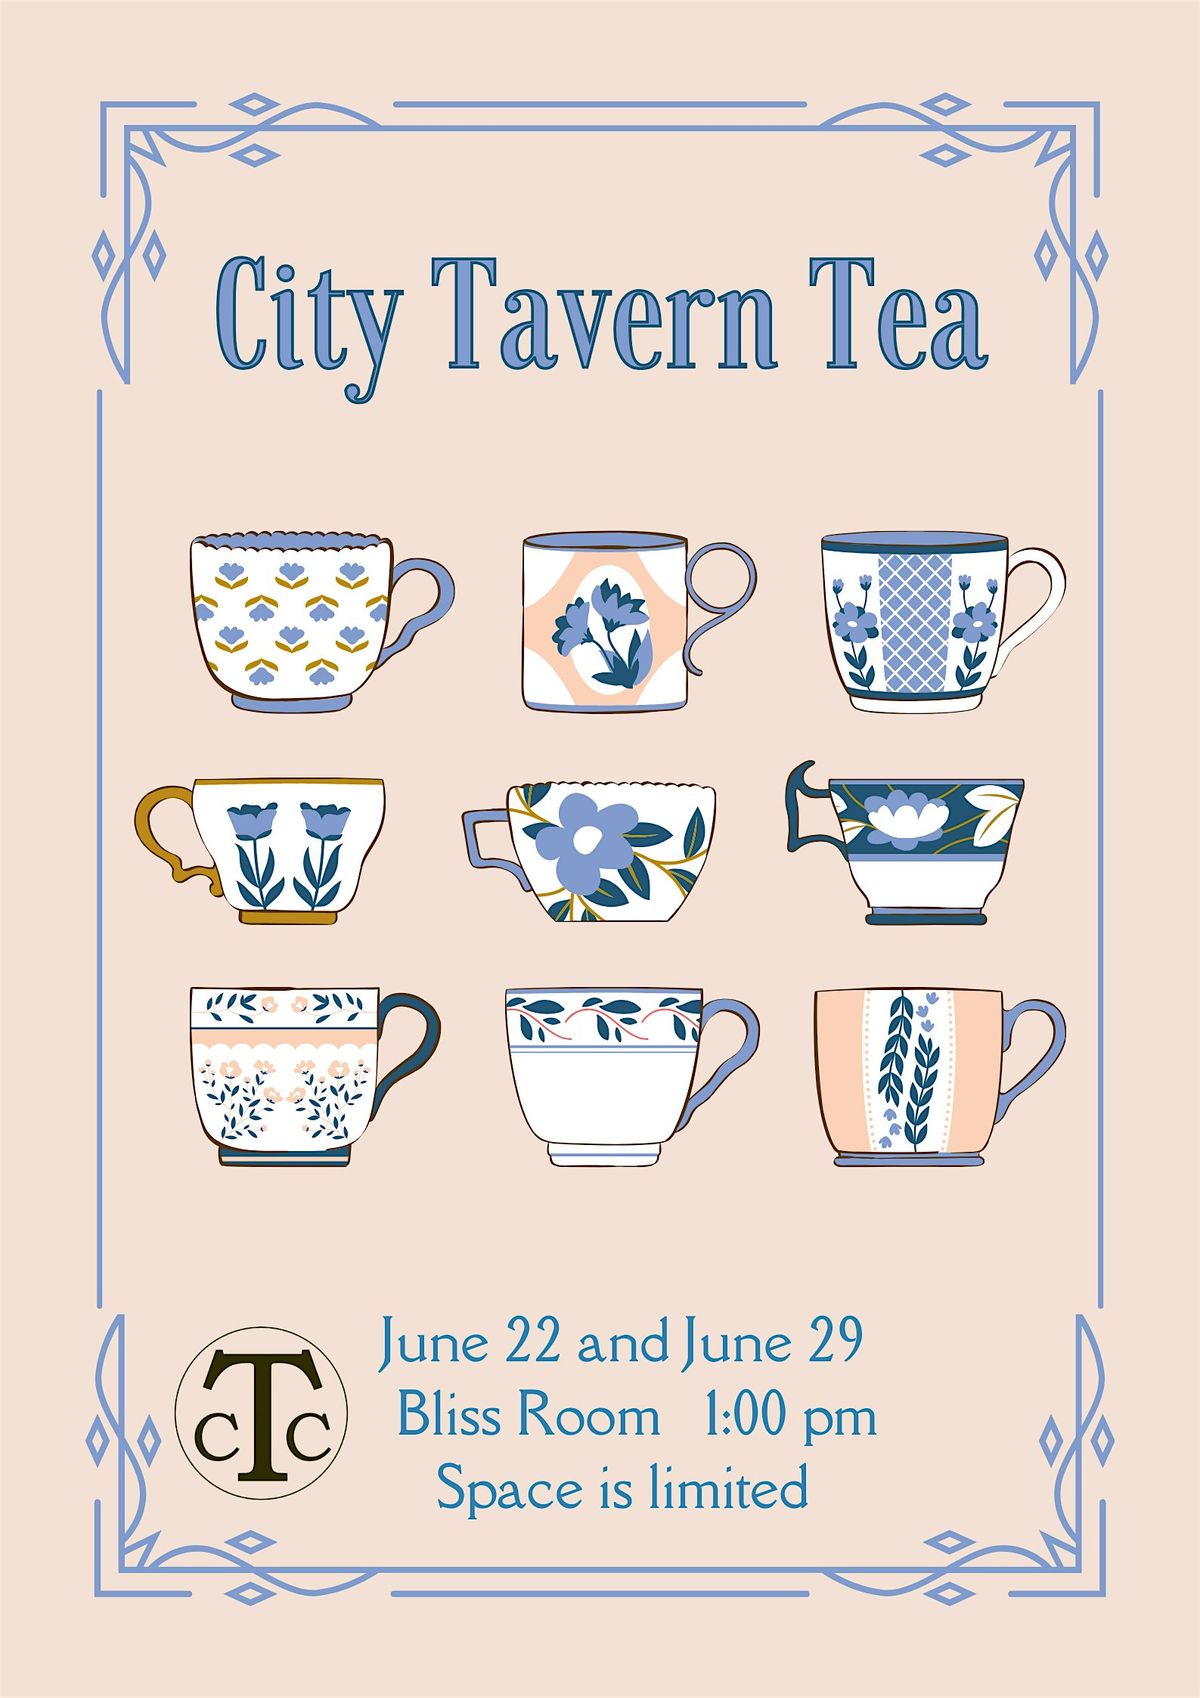 Delicious Teatime  in historic City Tavern  +   CAMERA OBSCURA experience